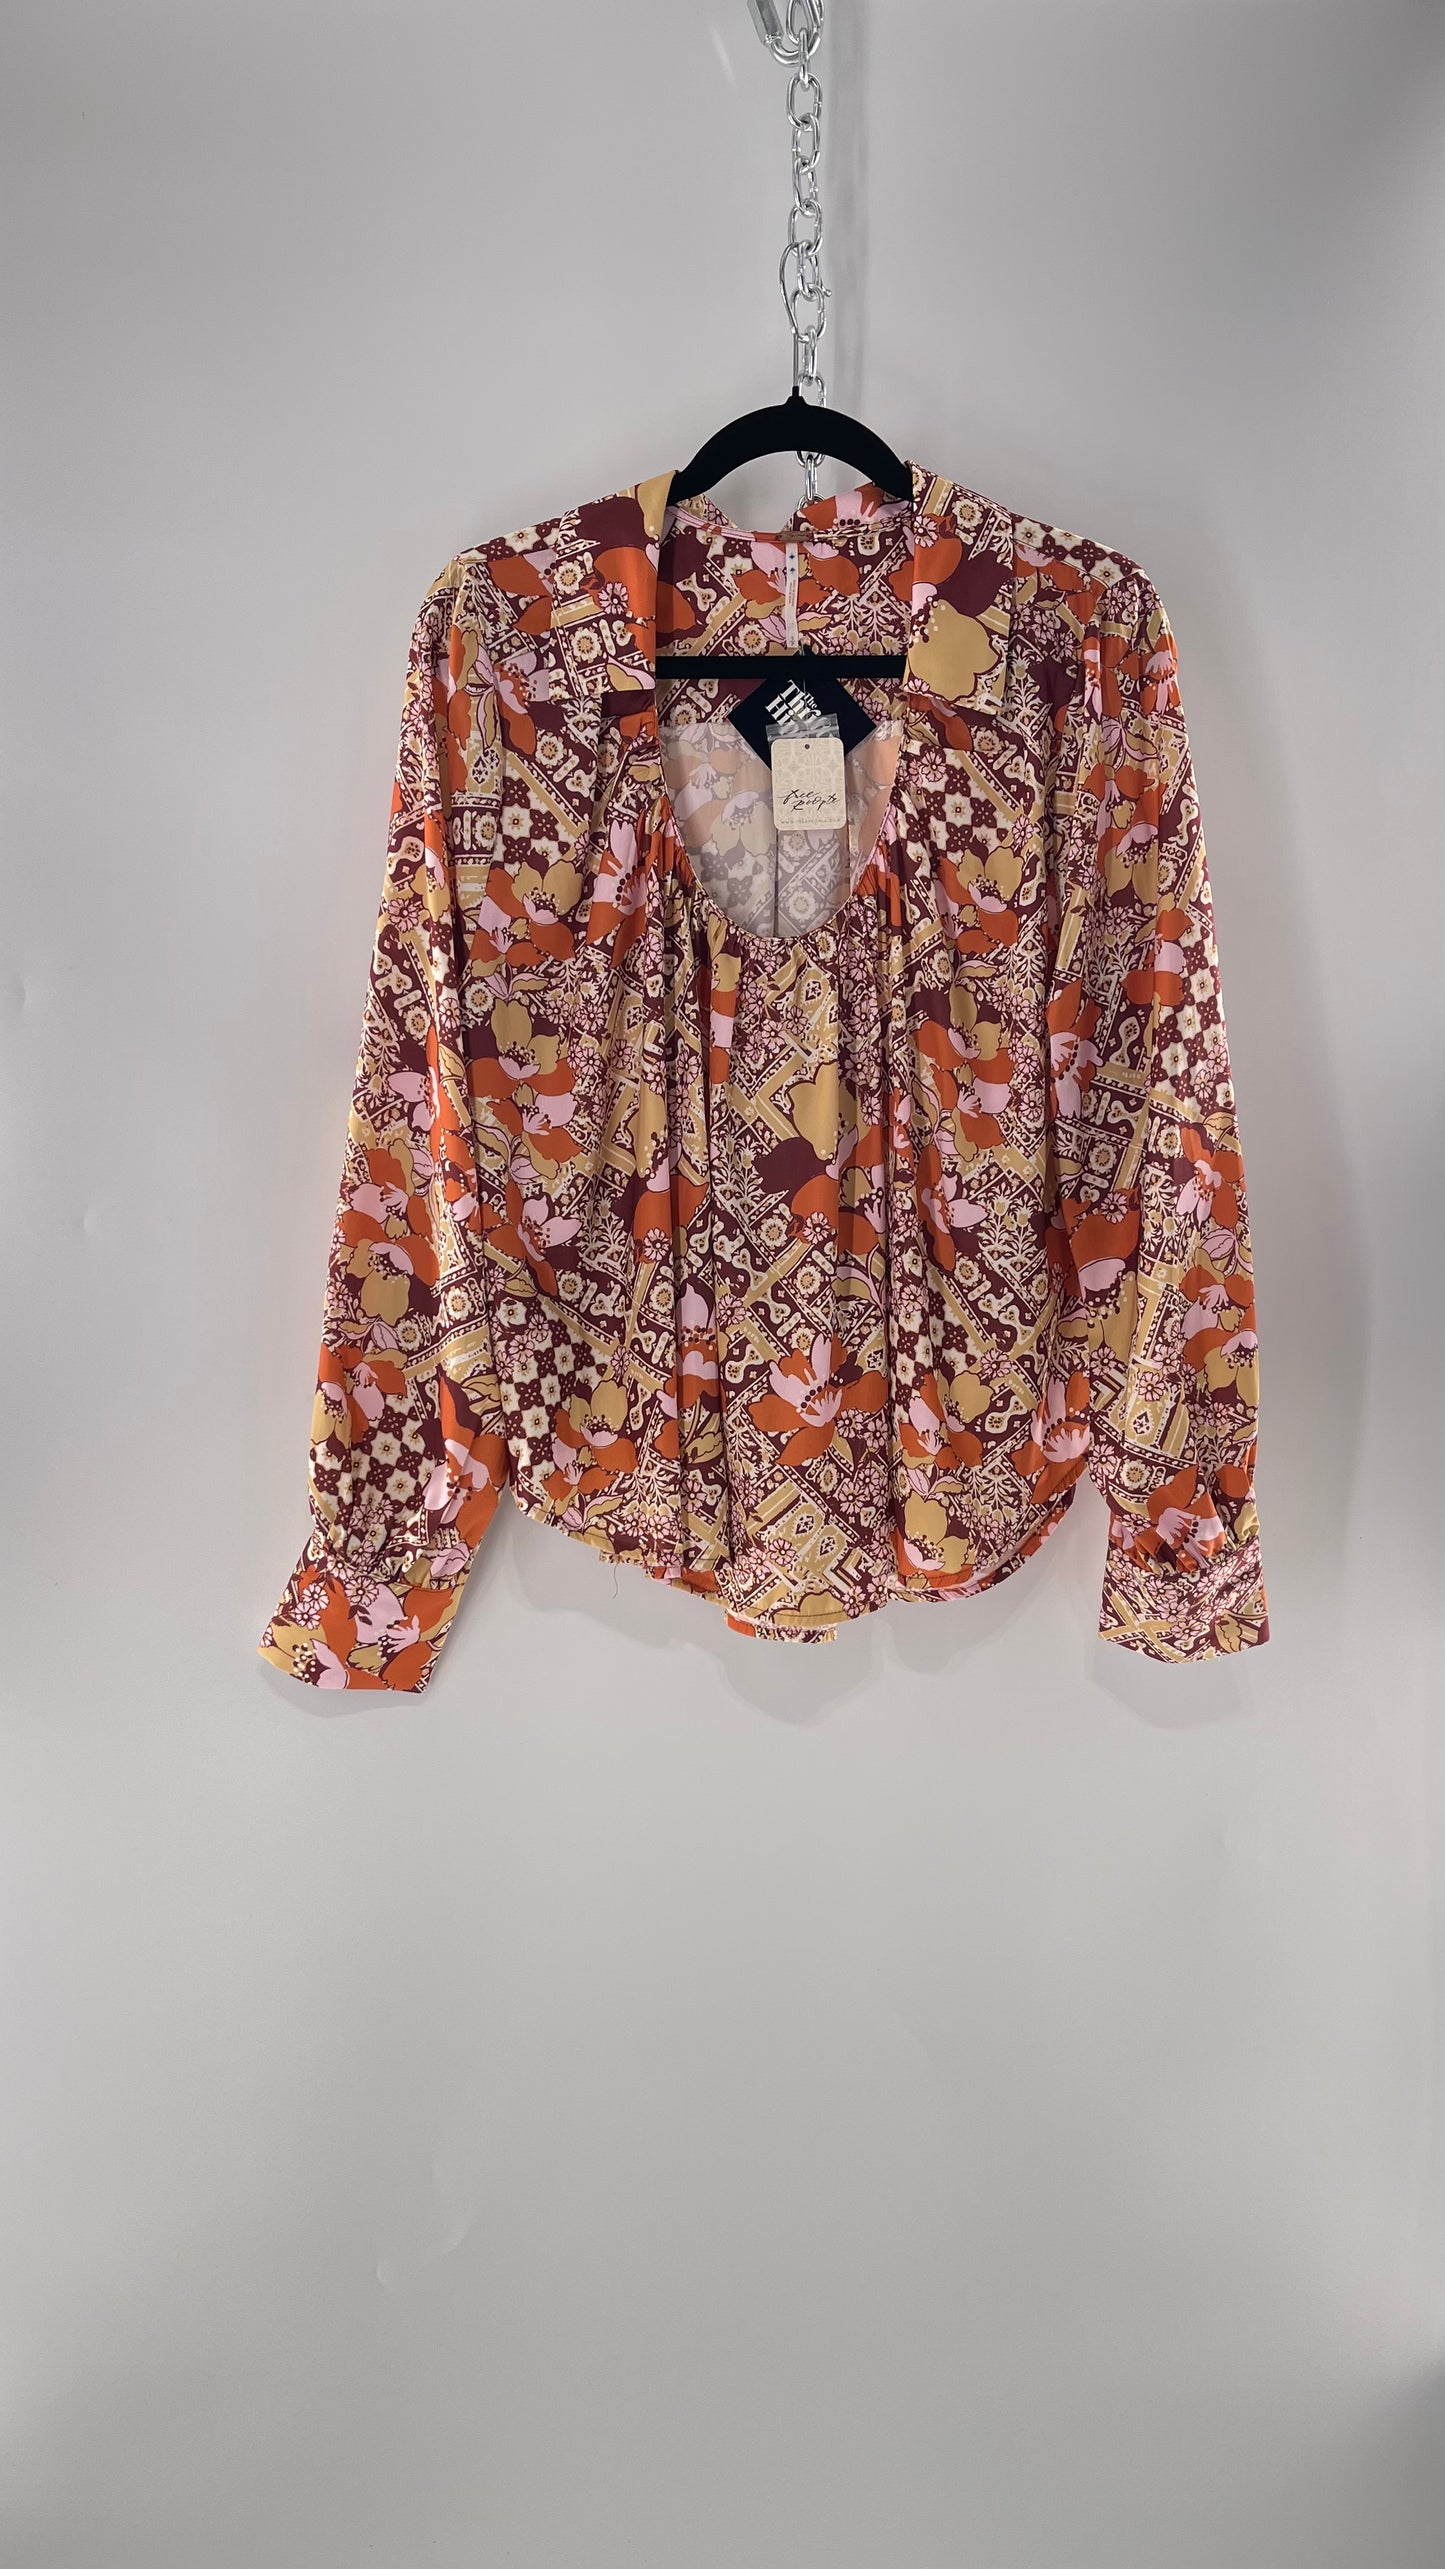 Free People All Over Mixed Warm Toned Satin Blouse with Pleated/Draping Neckline and Collar, Tags Attached  (Small)